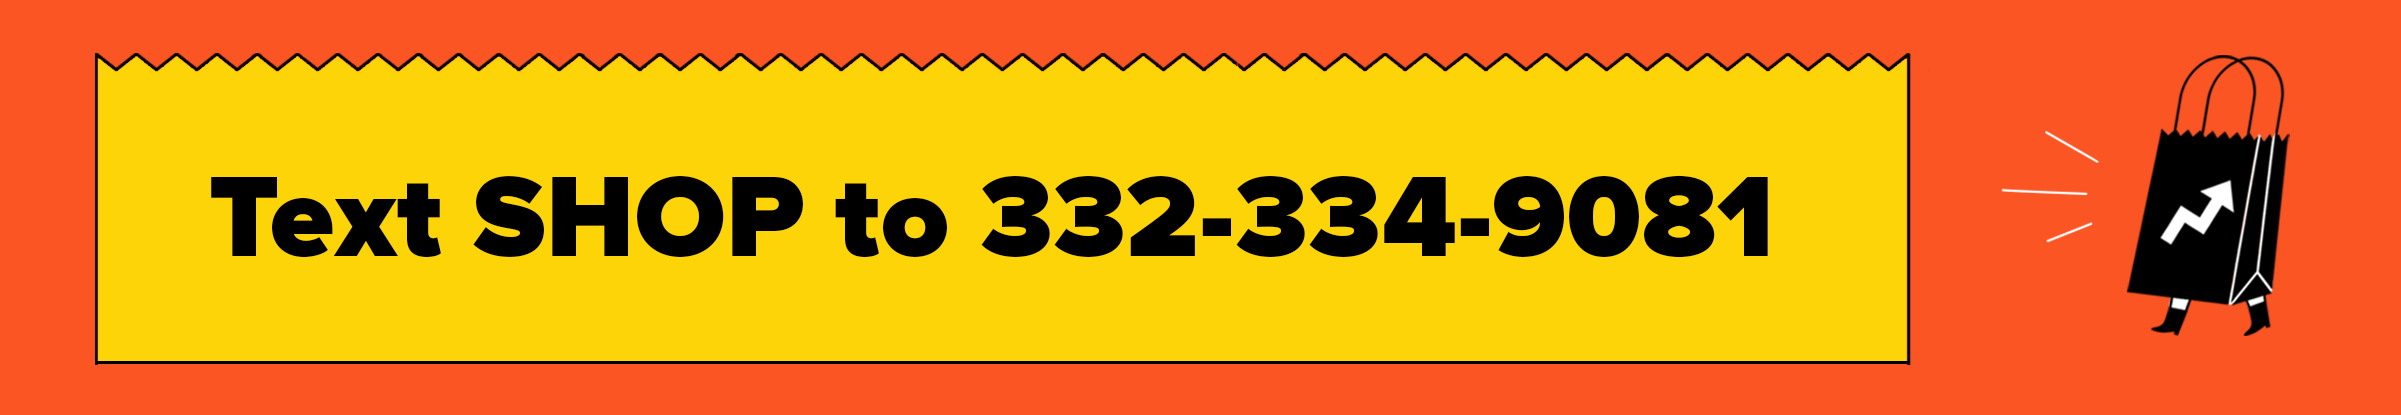 number to text for BuzzFeed Shopping recommendations, 332-334-9081